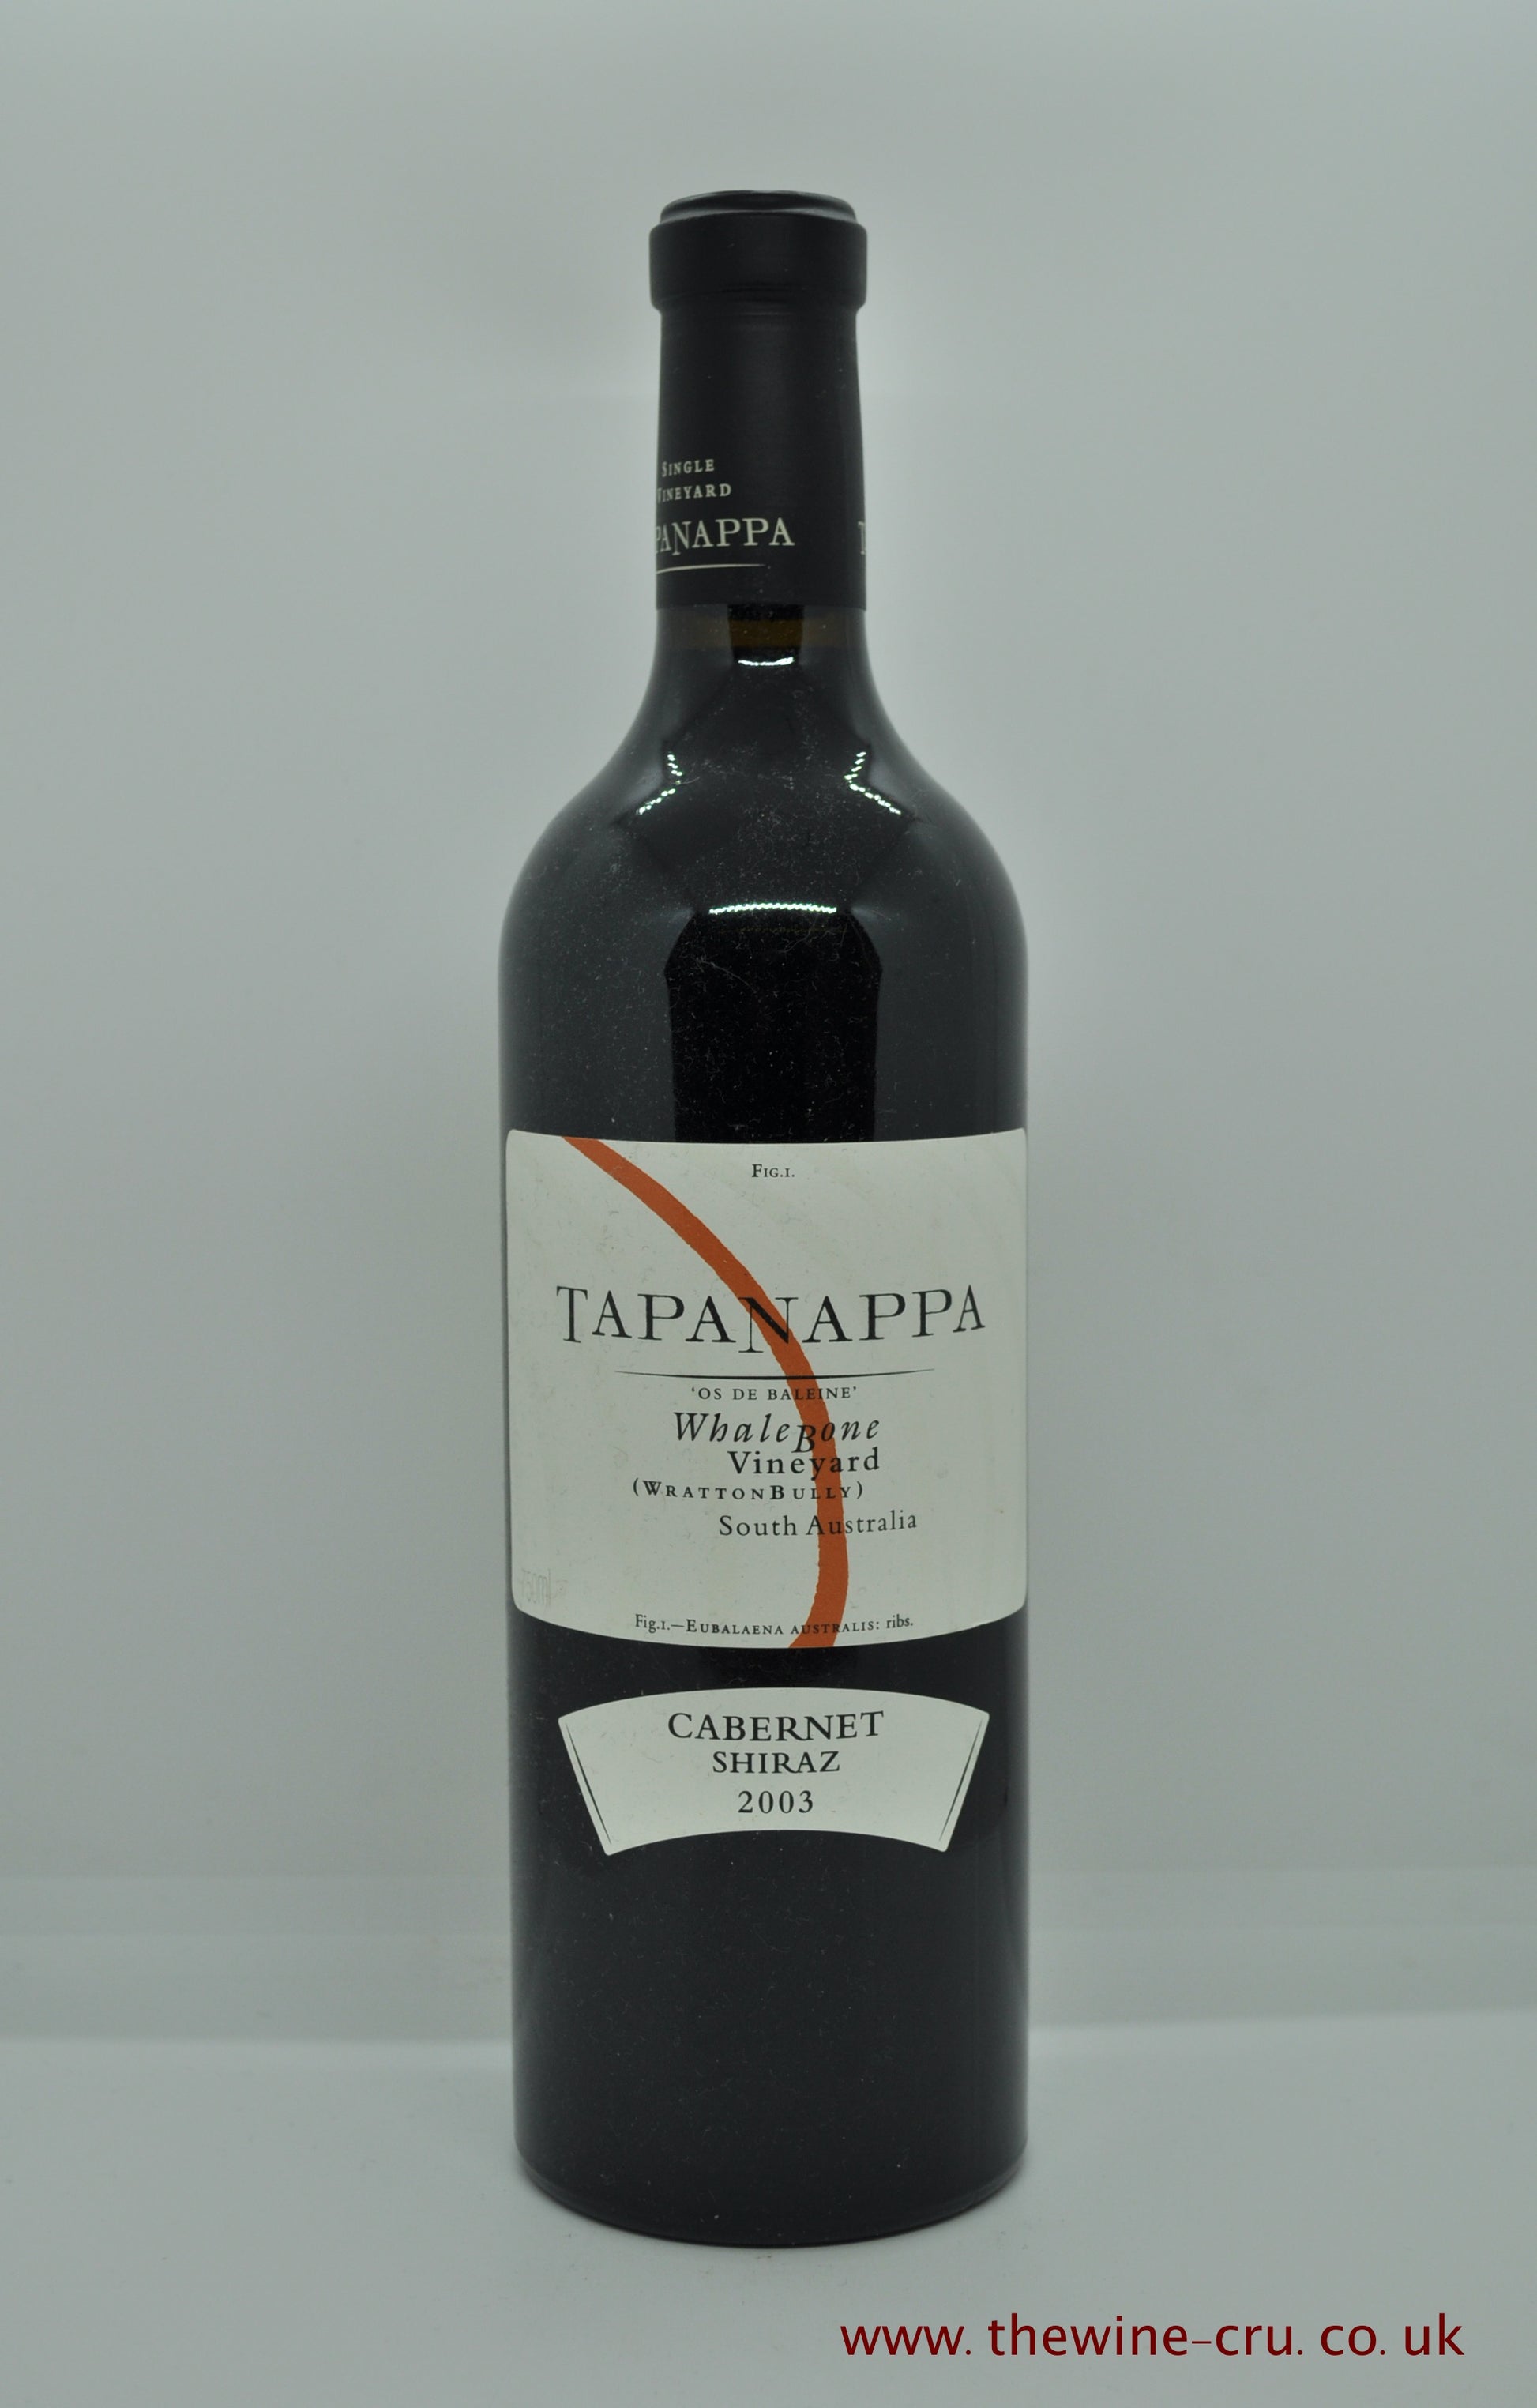 2003 vintage red wine. Tapanappa Whalebone Vineyard Cabernet Shiraz 2003. Australia. Immediate delivery. Free local delivery. Gift wrapping available.